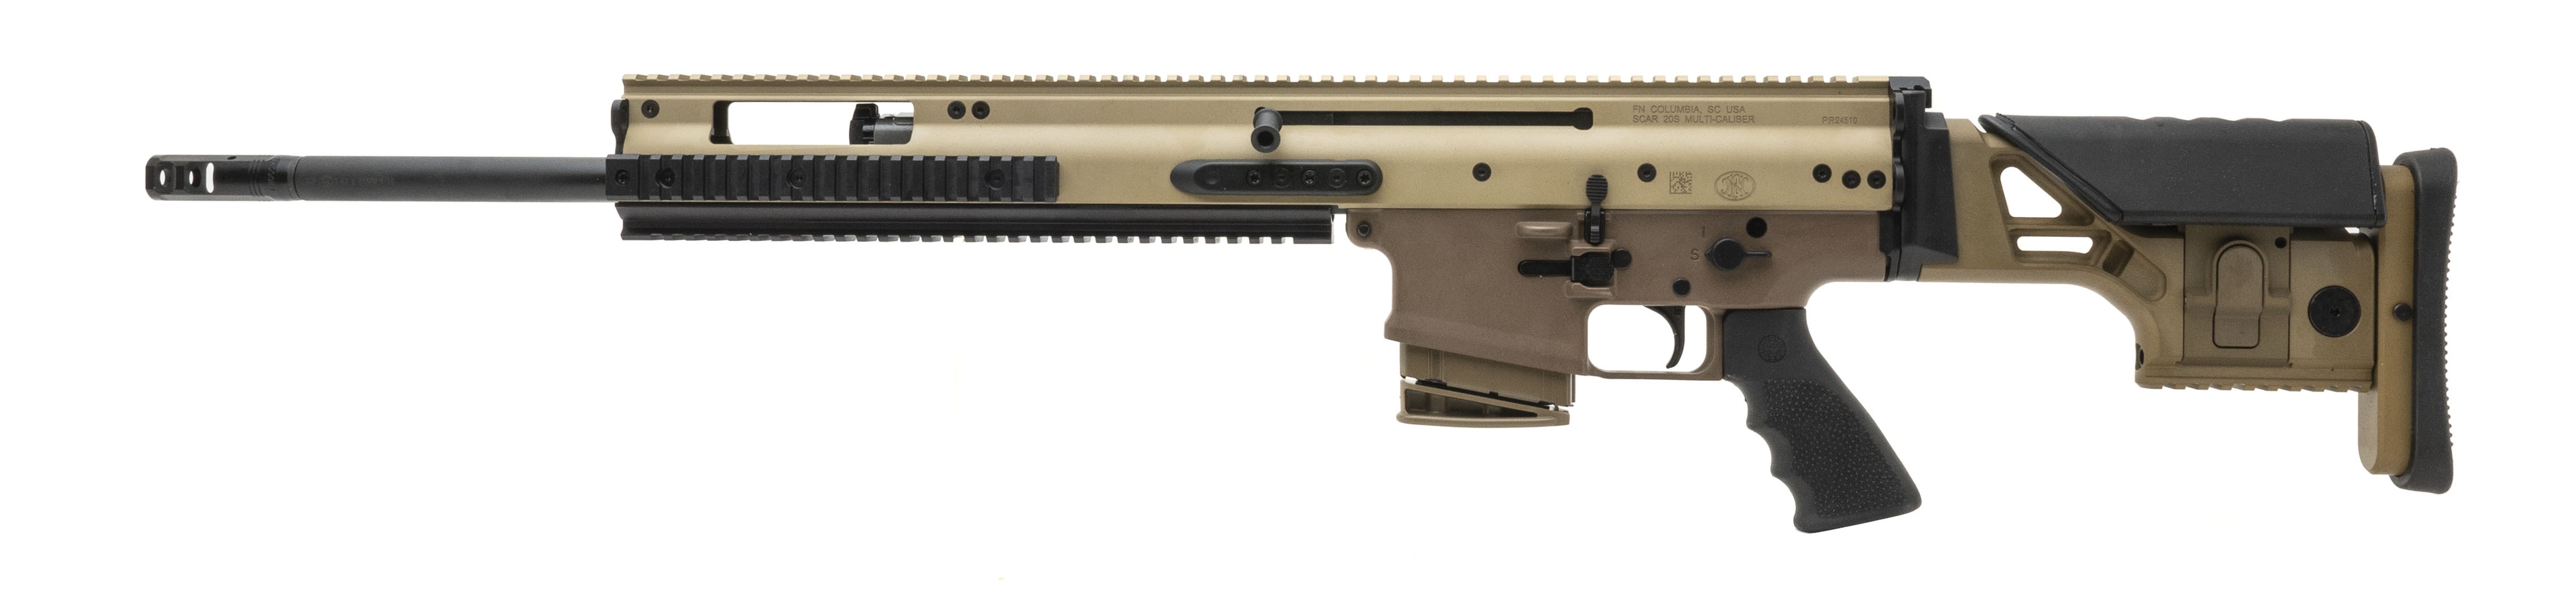 FN SCAR 20S 7.62X51mm (NGZ2024) NEW